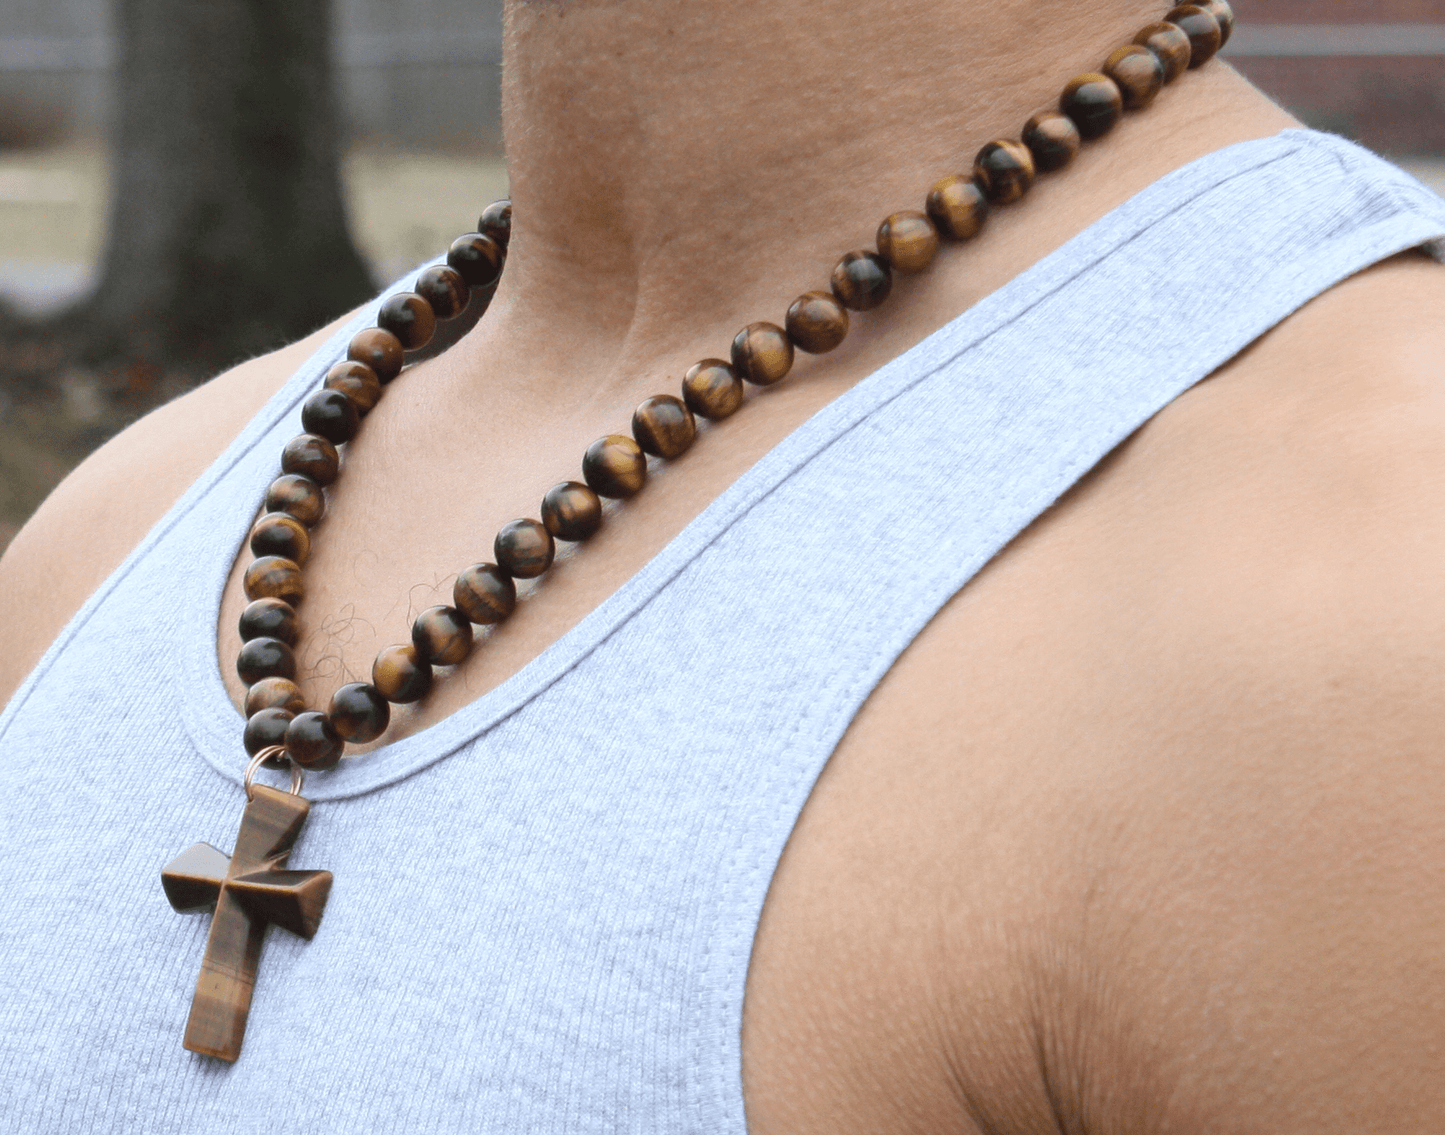 Genuine Tigers Eye Necklace with TIgers Eye Cross - Gift for Men/Woman - Spiritual Accessories - Religious Symbol